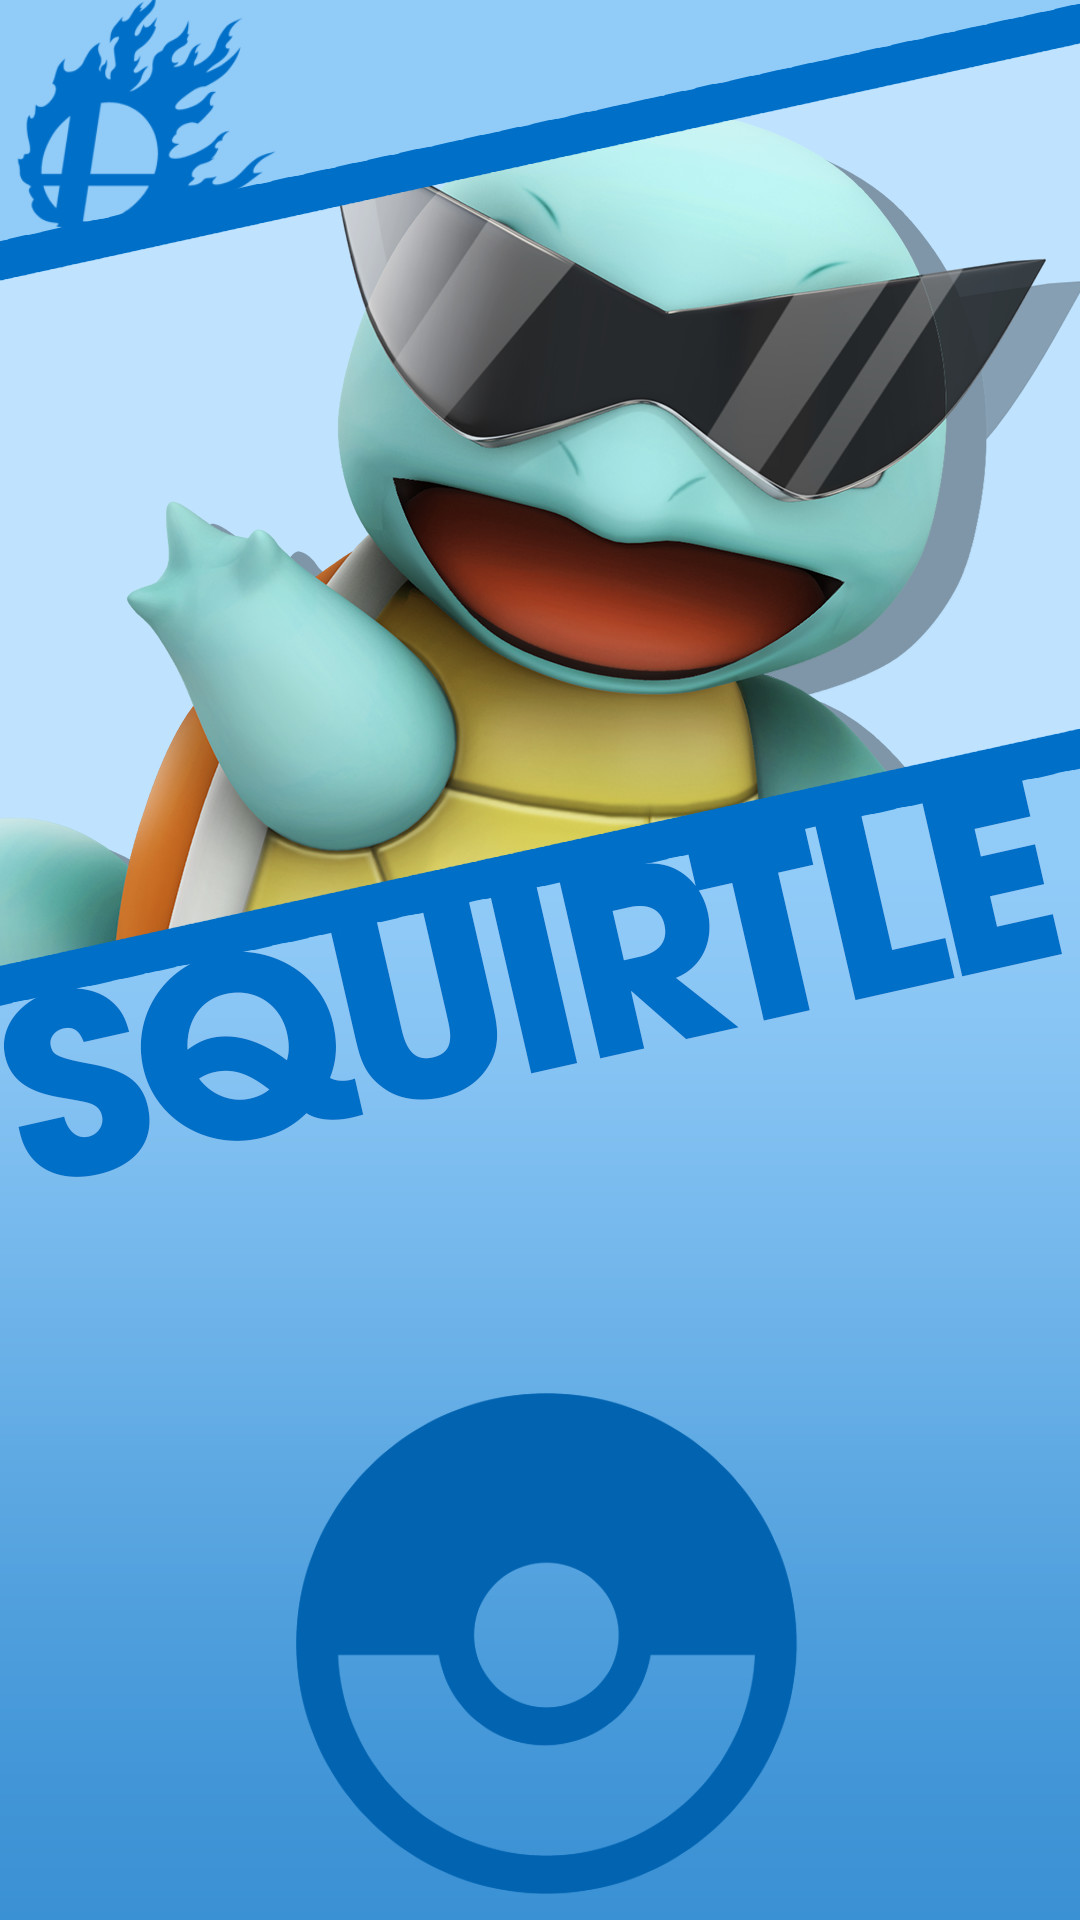 1080x1920 ... Squirtle(SquirtleSquad) Smash Bros Phone Wallpaper by MrThatKidAlex24